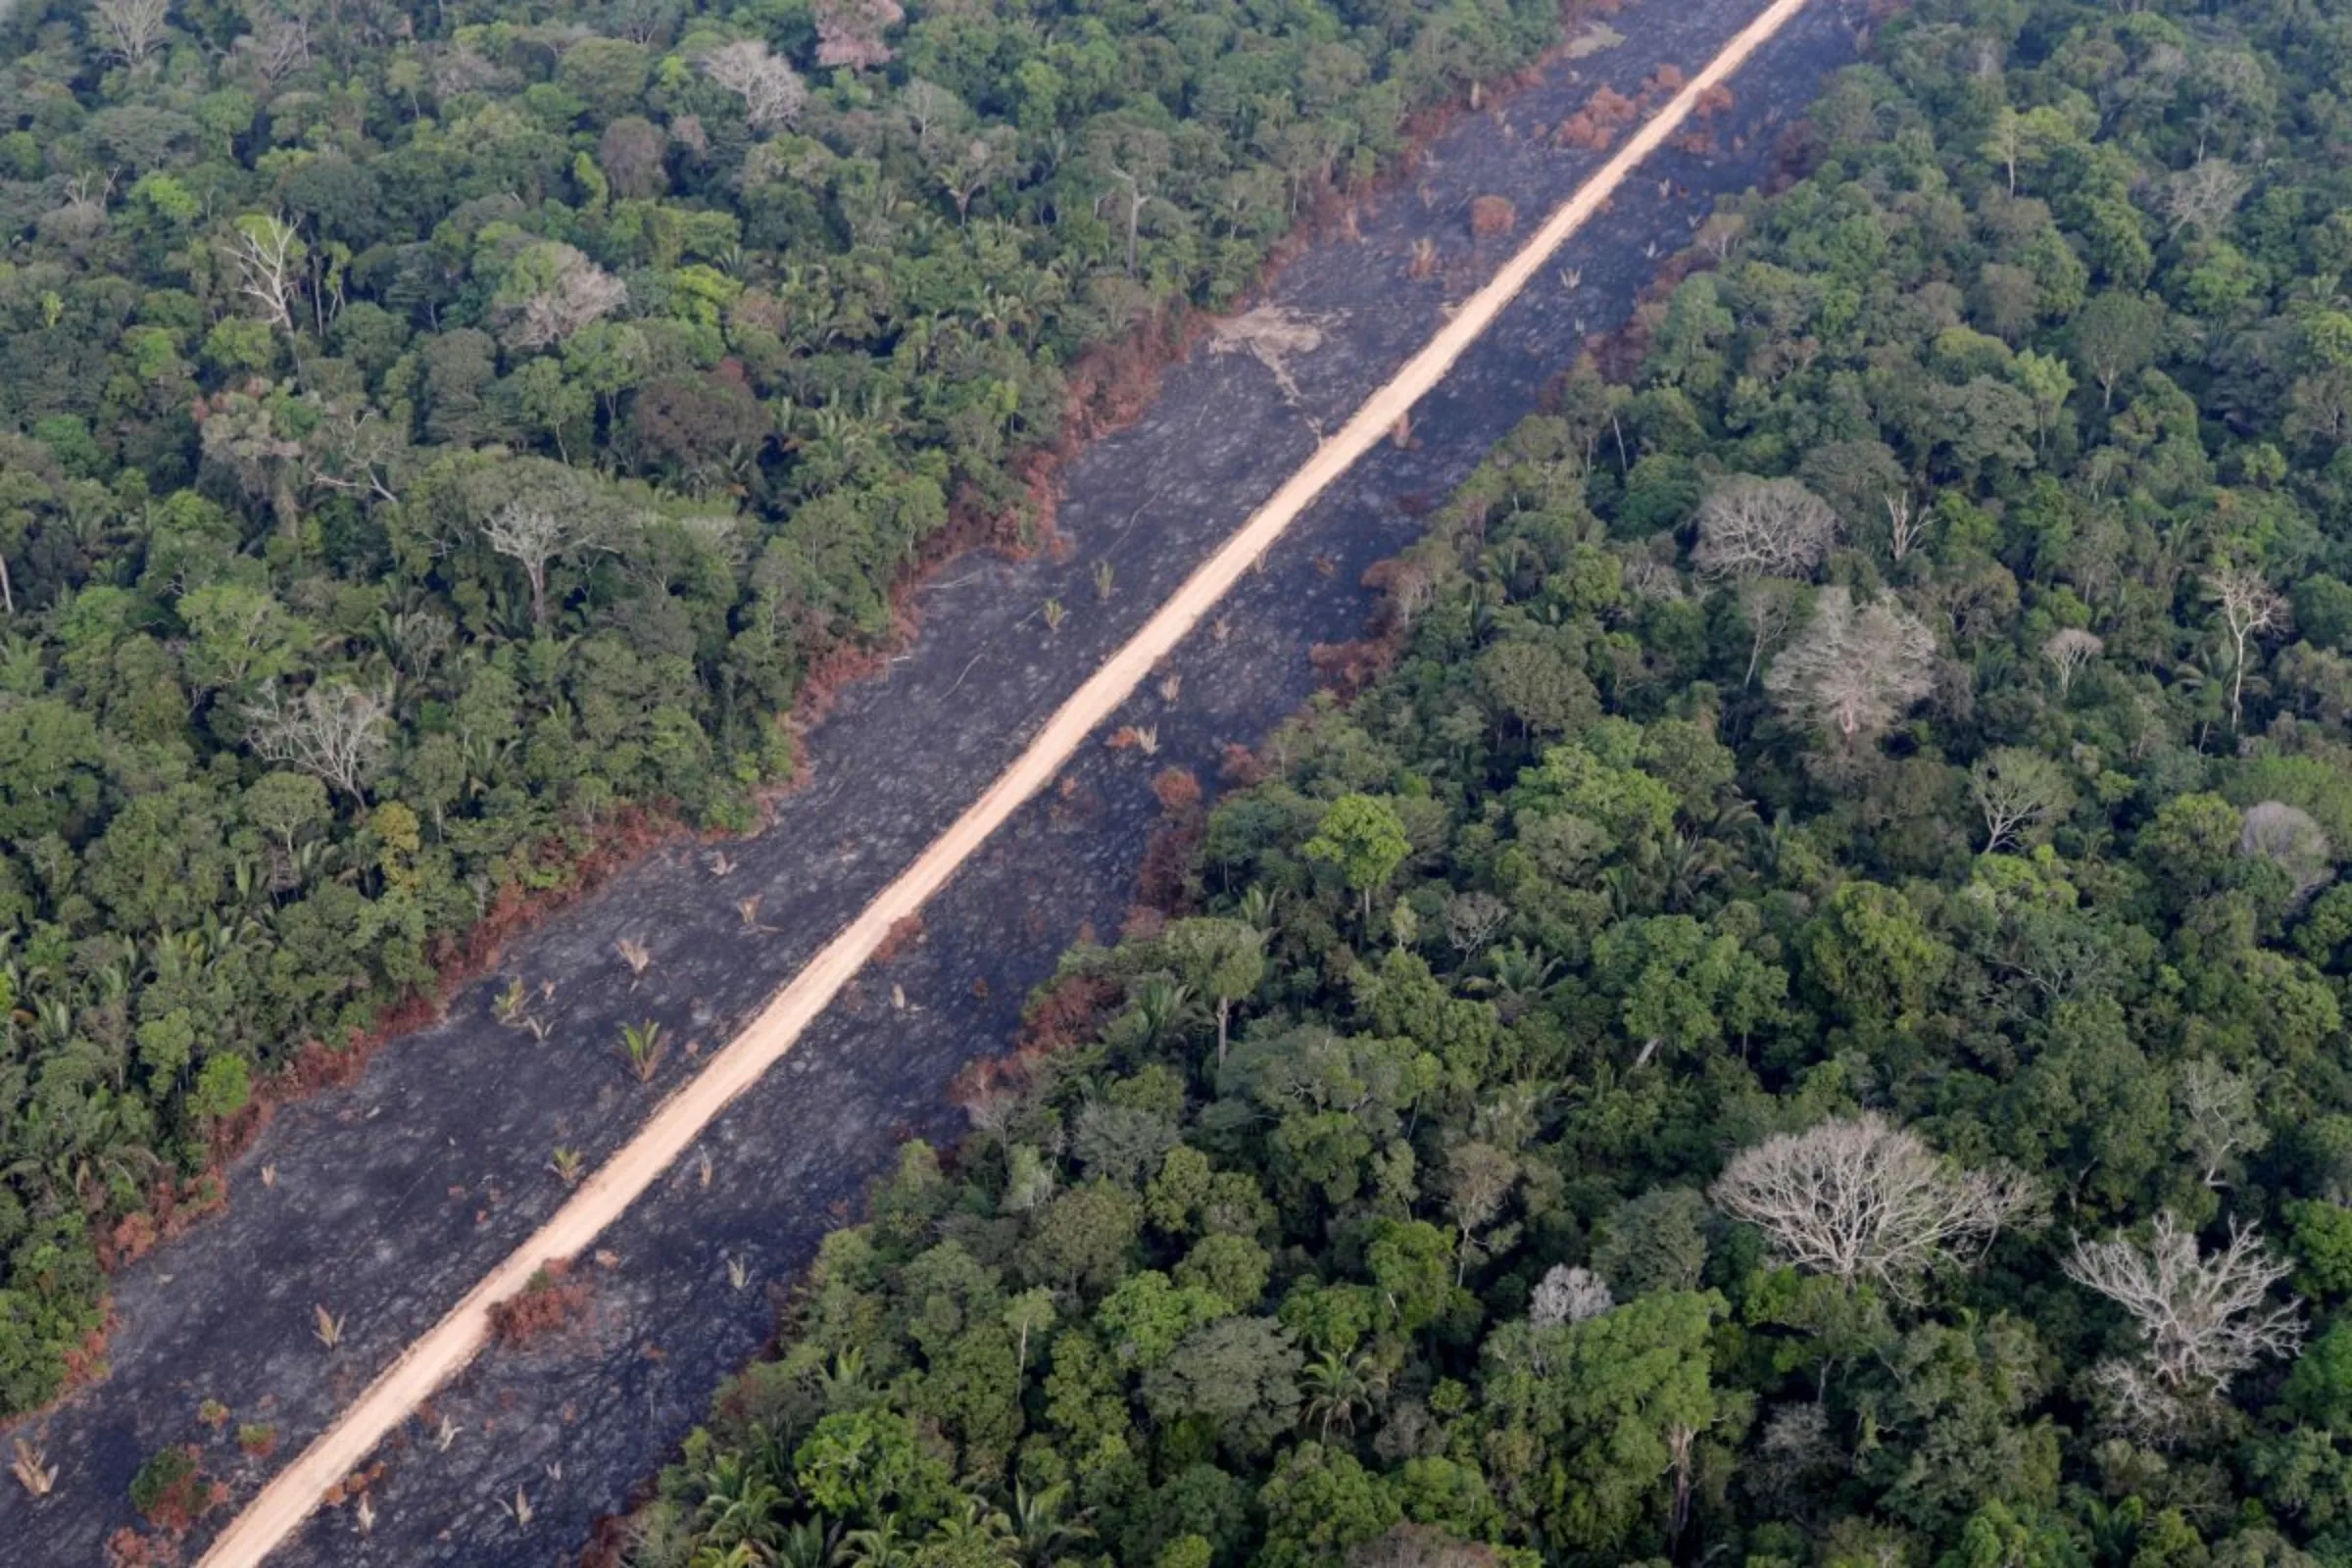 A road runs through a tract of burnt Amazon jungle near Porto Velho, Rondonia State, Brazil, August 14, 2020. Creatures of the Amazon, one of the earth's most biodiverse habitats, face an ever-growing threat as loggers and farms advance further and further into the rainforest. REUTERS/Ueslei Marcelino